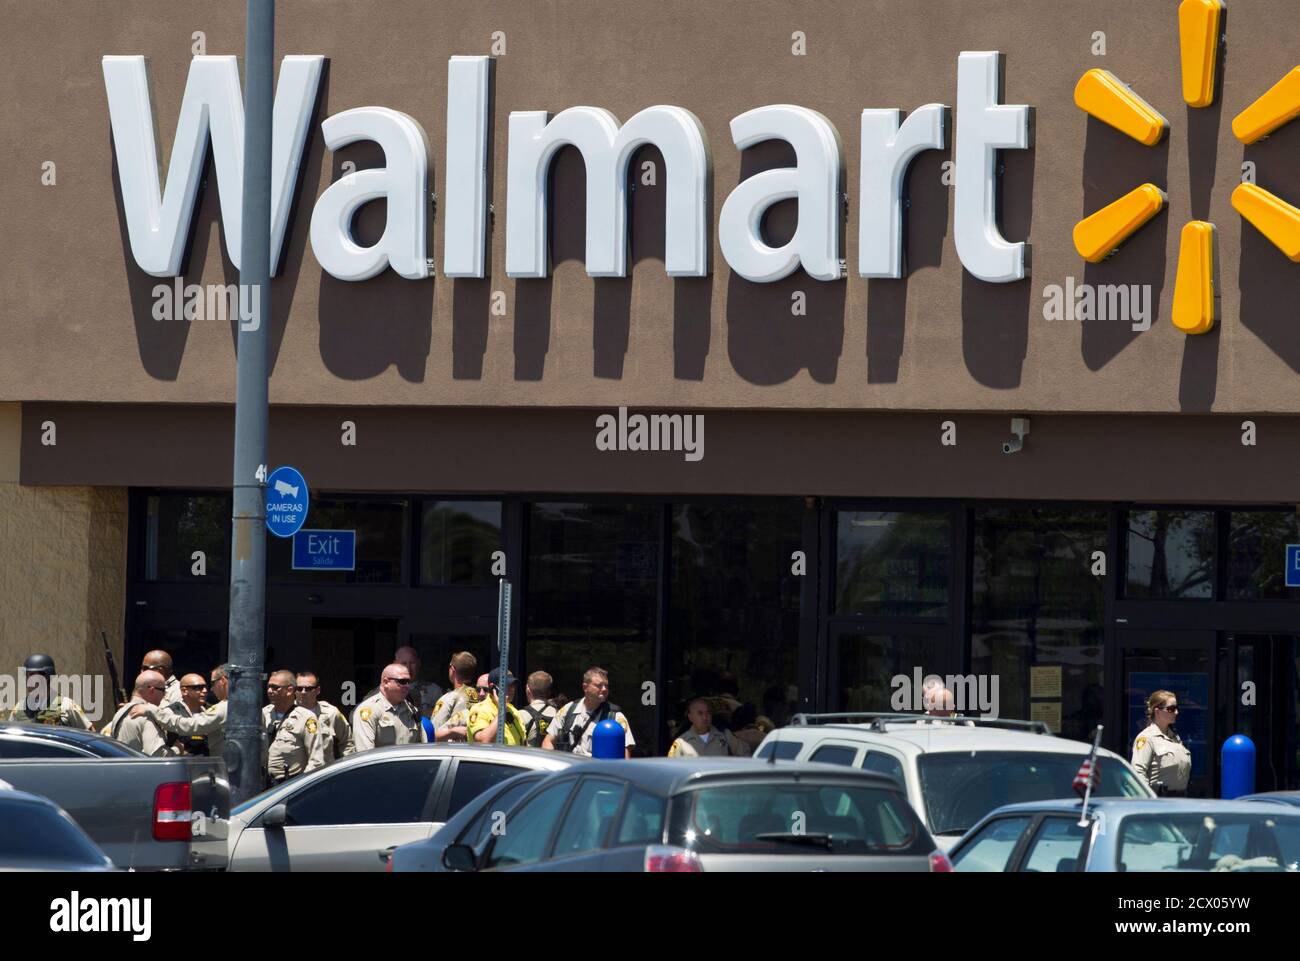 Metro Police officers are shown outside a Walmart after a shooting in Las Vegas June 8, 2014. Las Vegas police said on Sunday that a shooting incident involving officers resulted in injuries and urged people to stay away from the scene. The Las Vegas Metropolitan Police Department said in a tweet that the incident occurred near north Las Vegas, at an address close to a Wal-Mart store. REUTERS/Las Vegas Sun/Steve Marcus (UNITED STATESCRIME LAW) Stock Photo